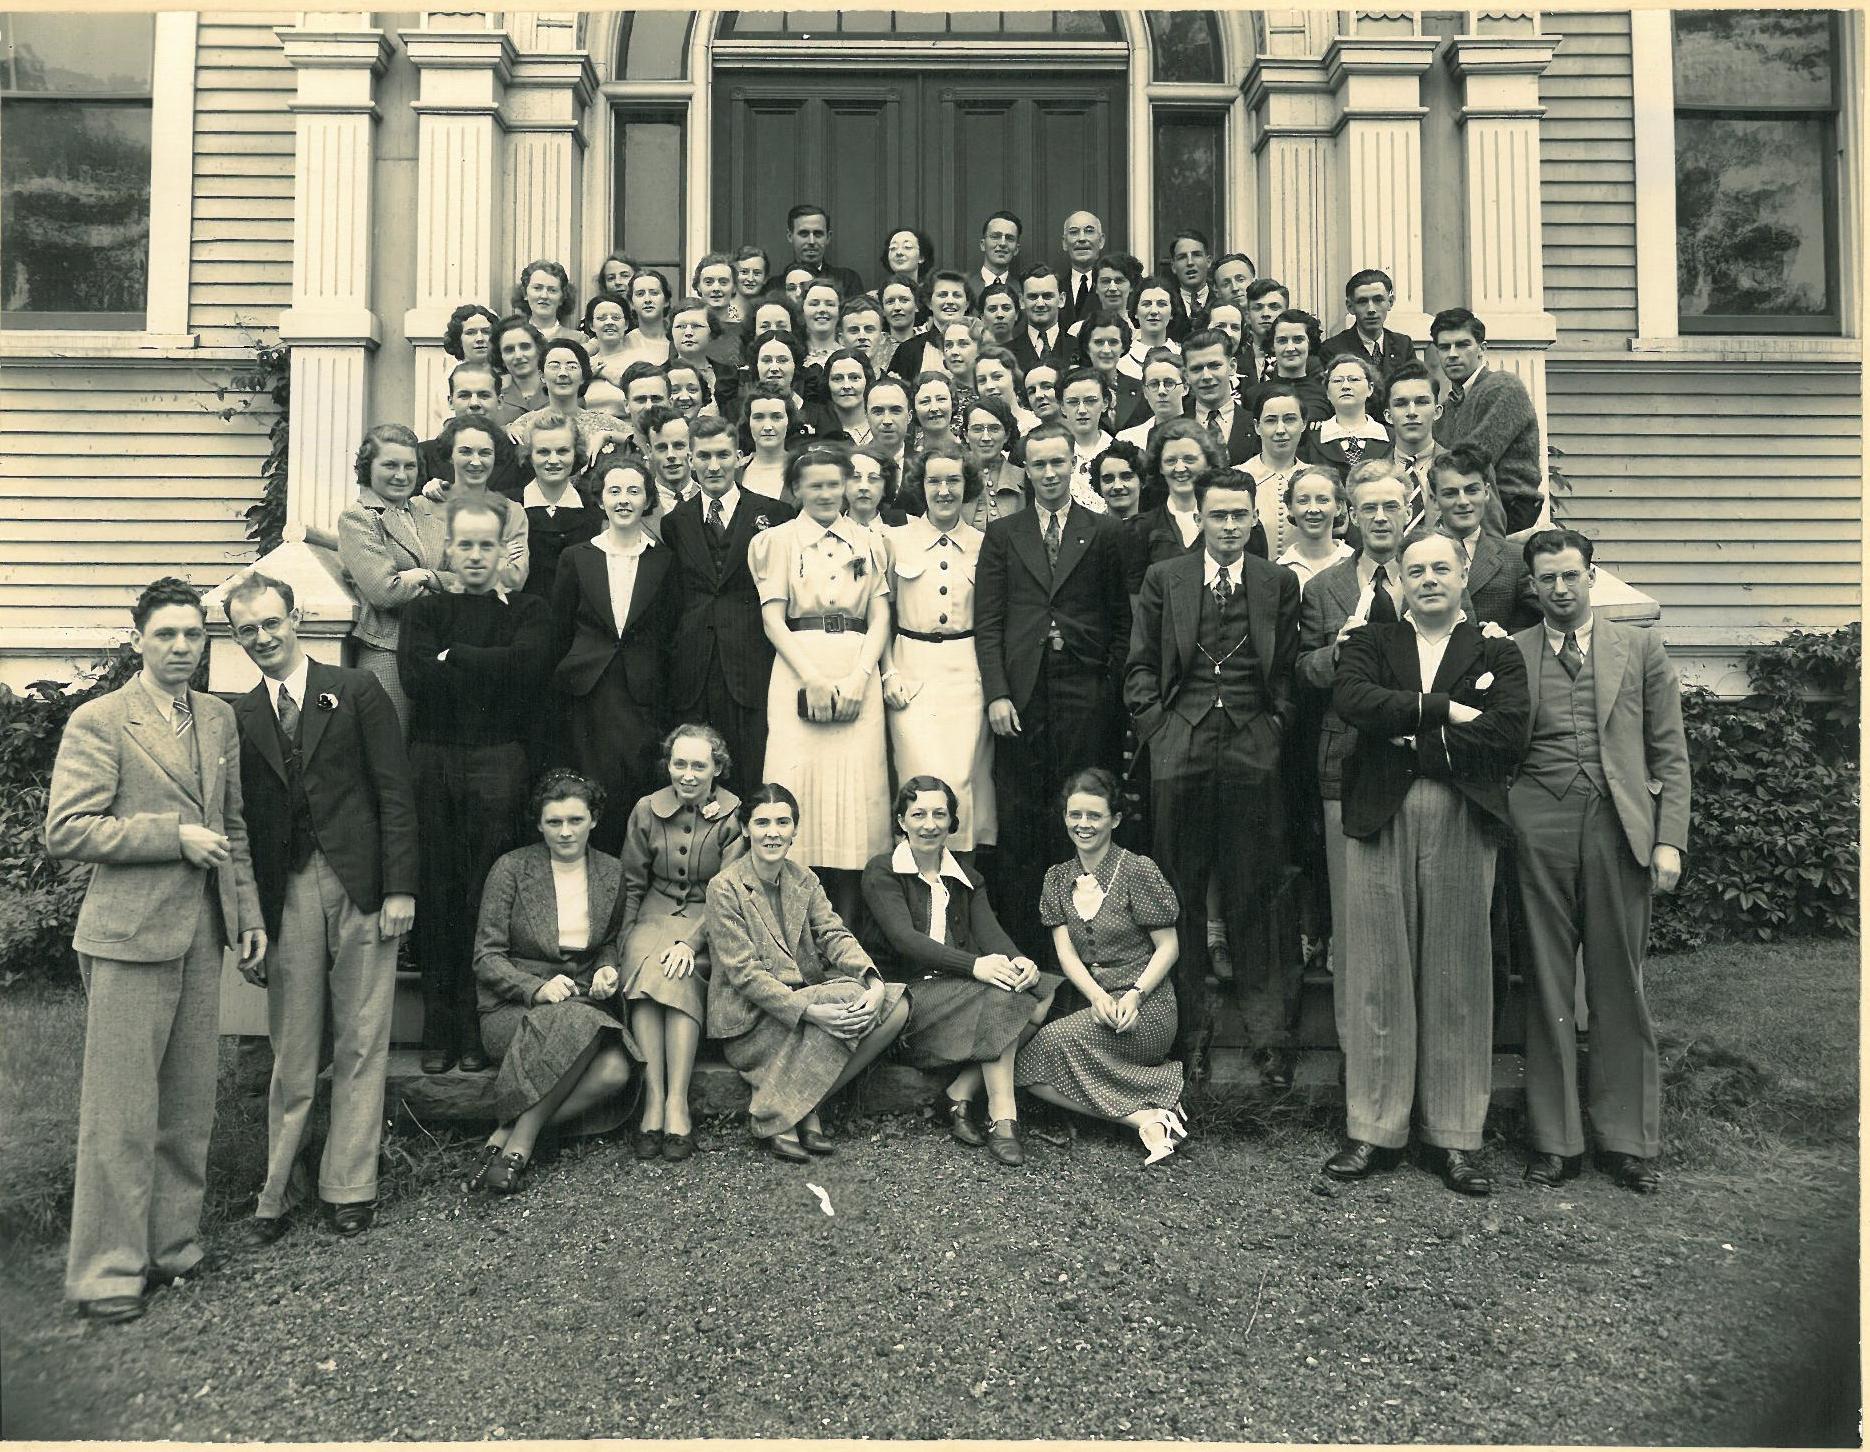 Different clothes, same great experience: Youth at Conference, 1945